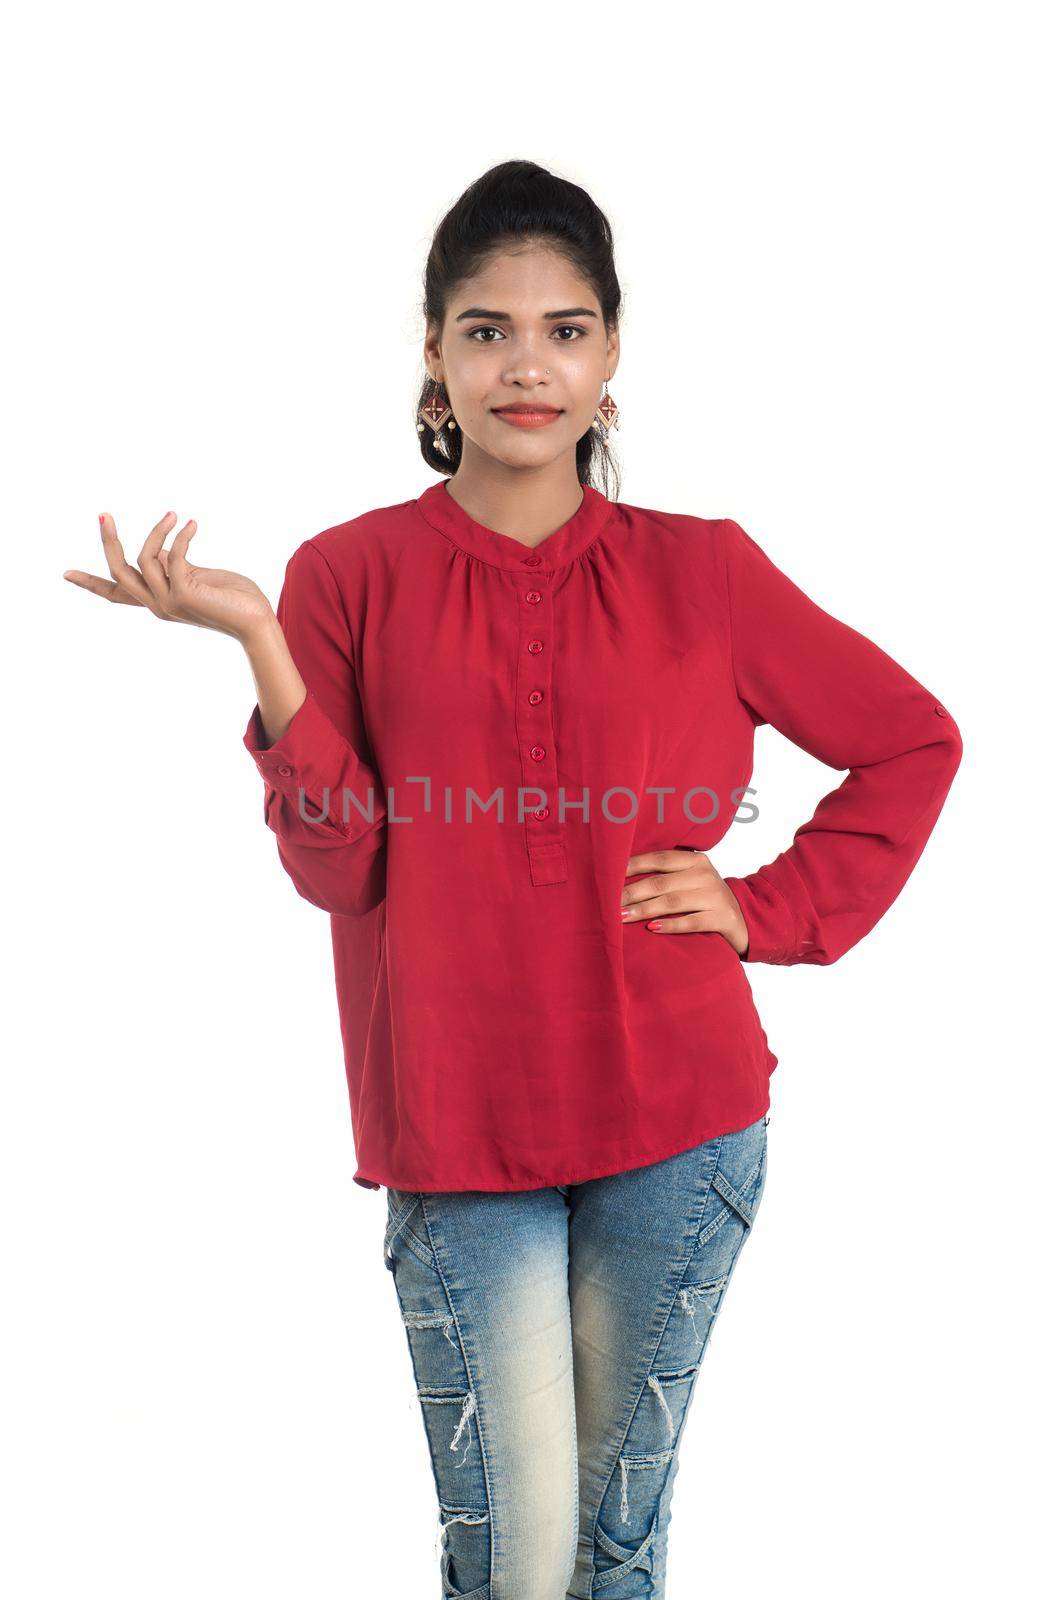 Young smiling girl pointing fingers to copy space on a white background by DipakShelare